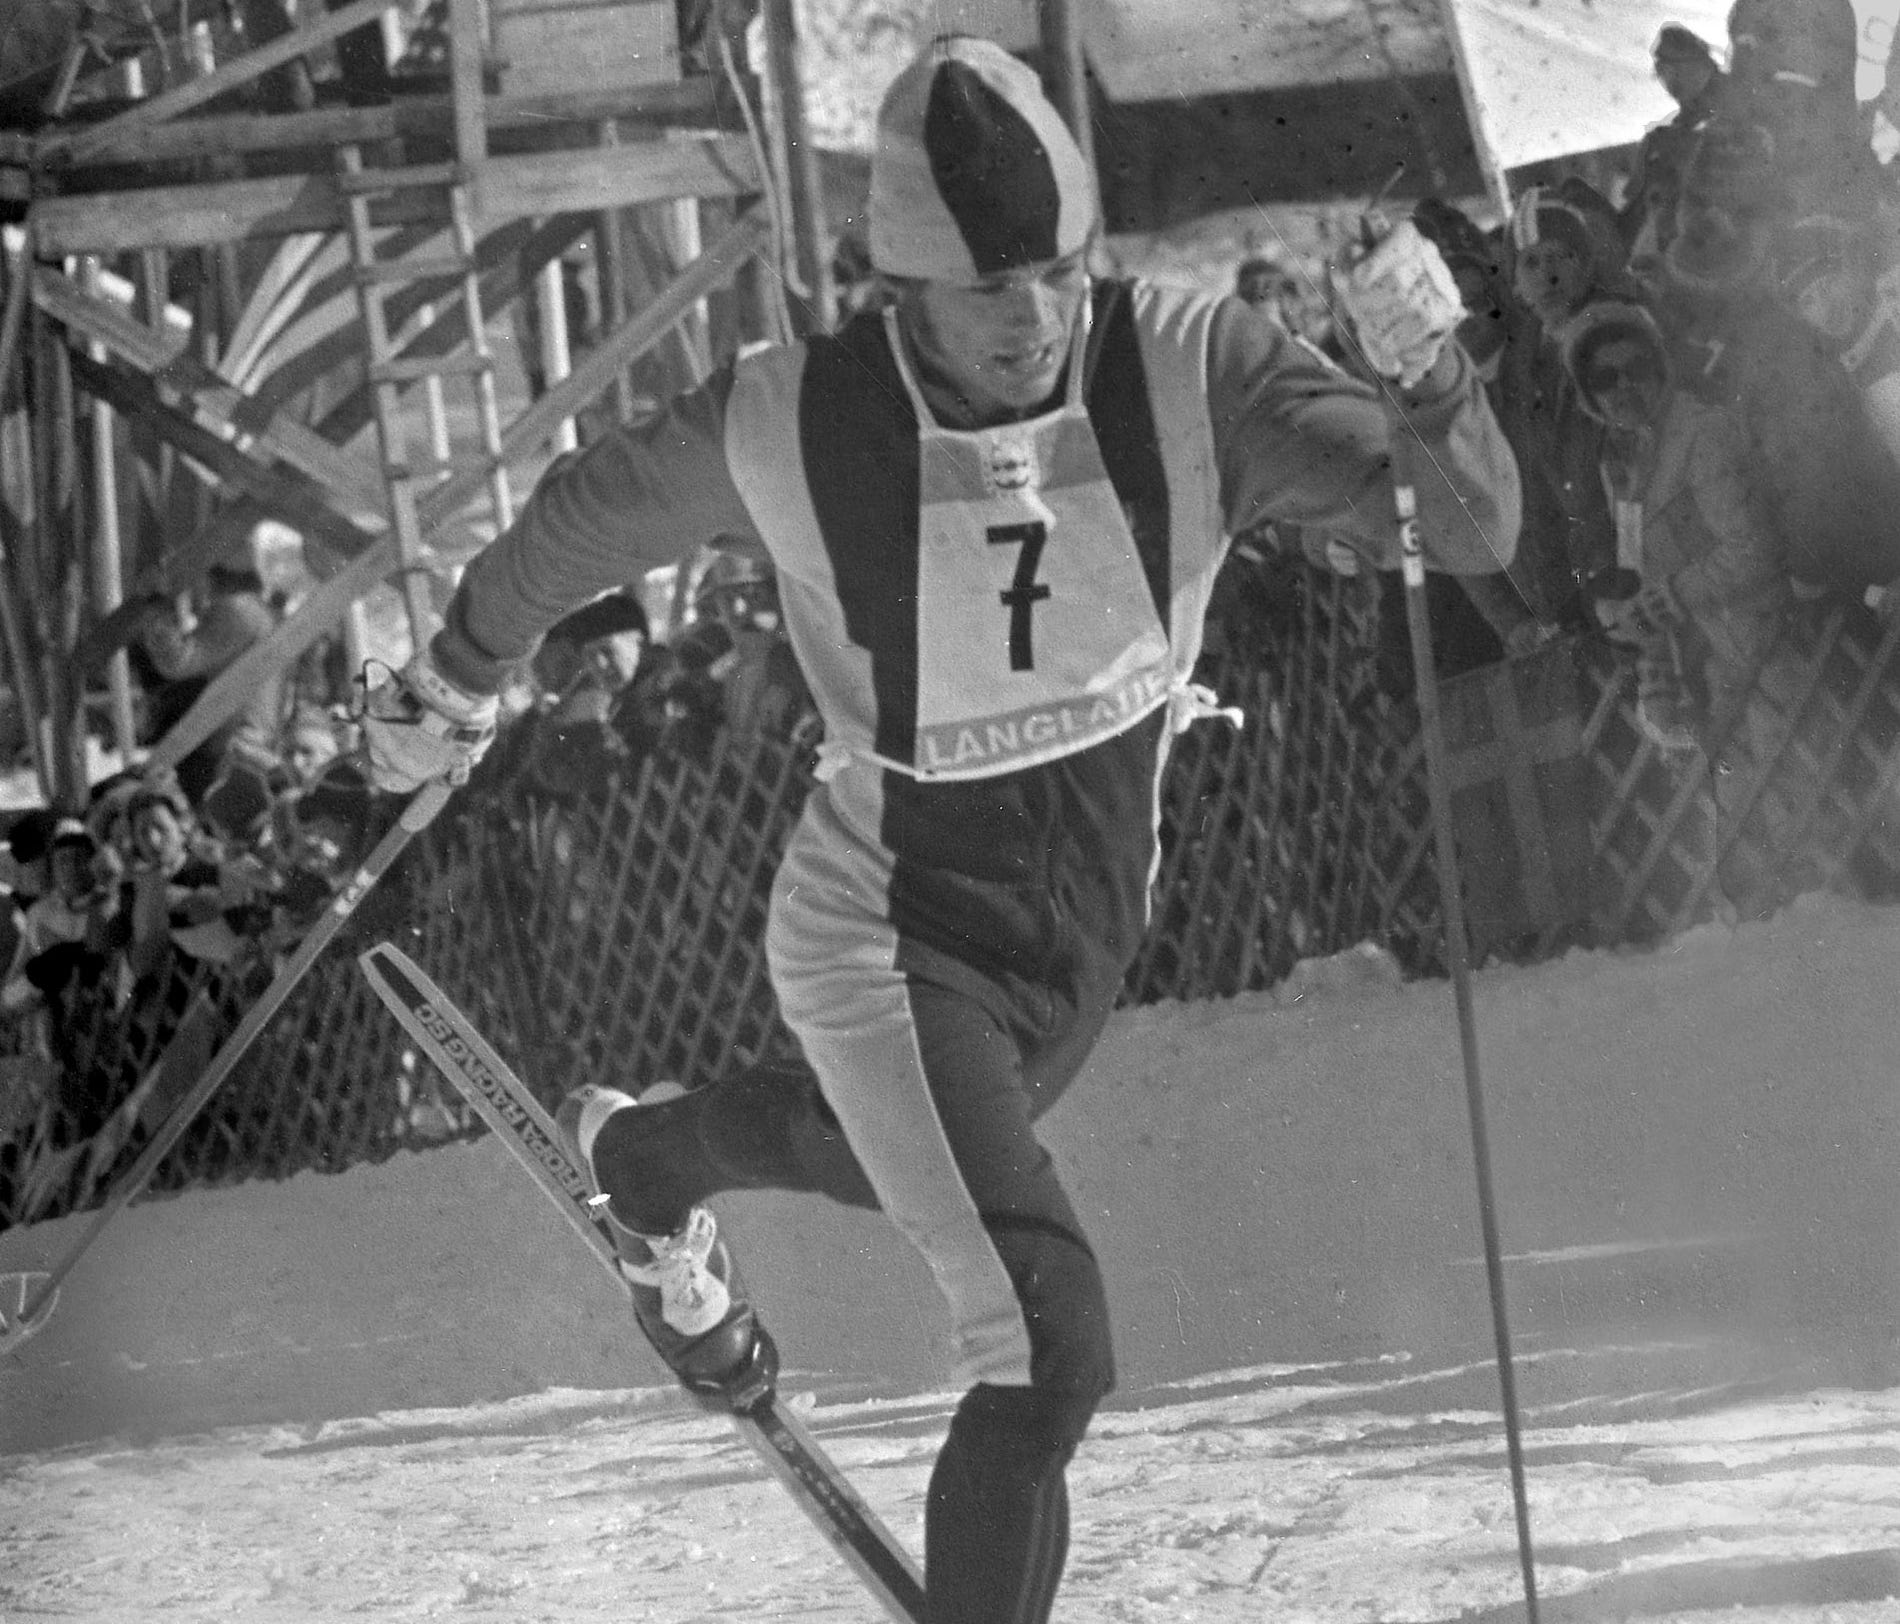 Bill Koch of Guilford, Vt., crosses the finish line to win the silver medal in the men's 30-kilometer cross-country skiing race in the Winter Olympics at Seefeld, Austria, Thursday, Feb. 5, 1976.  Koch, at 1:30:57.84, was less than 30 seconds behind 